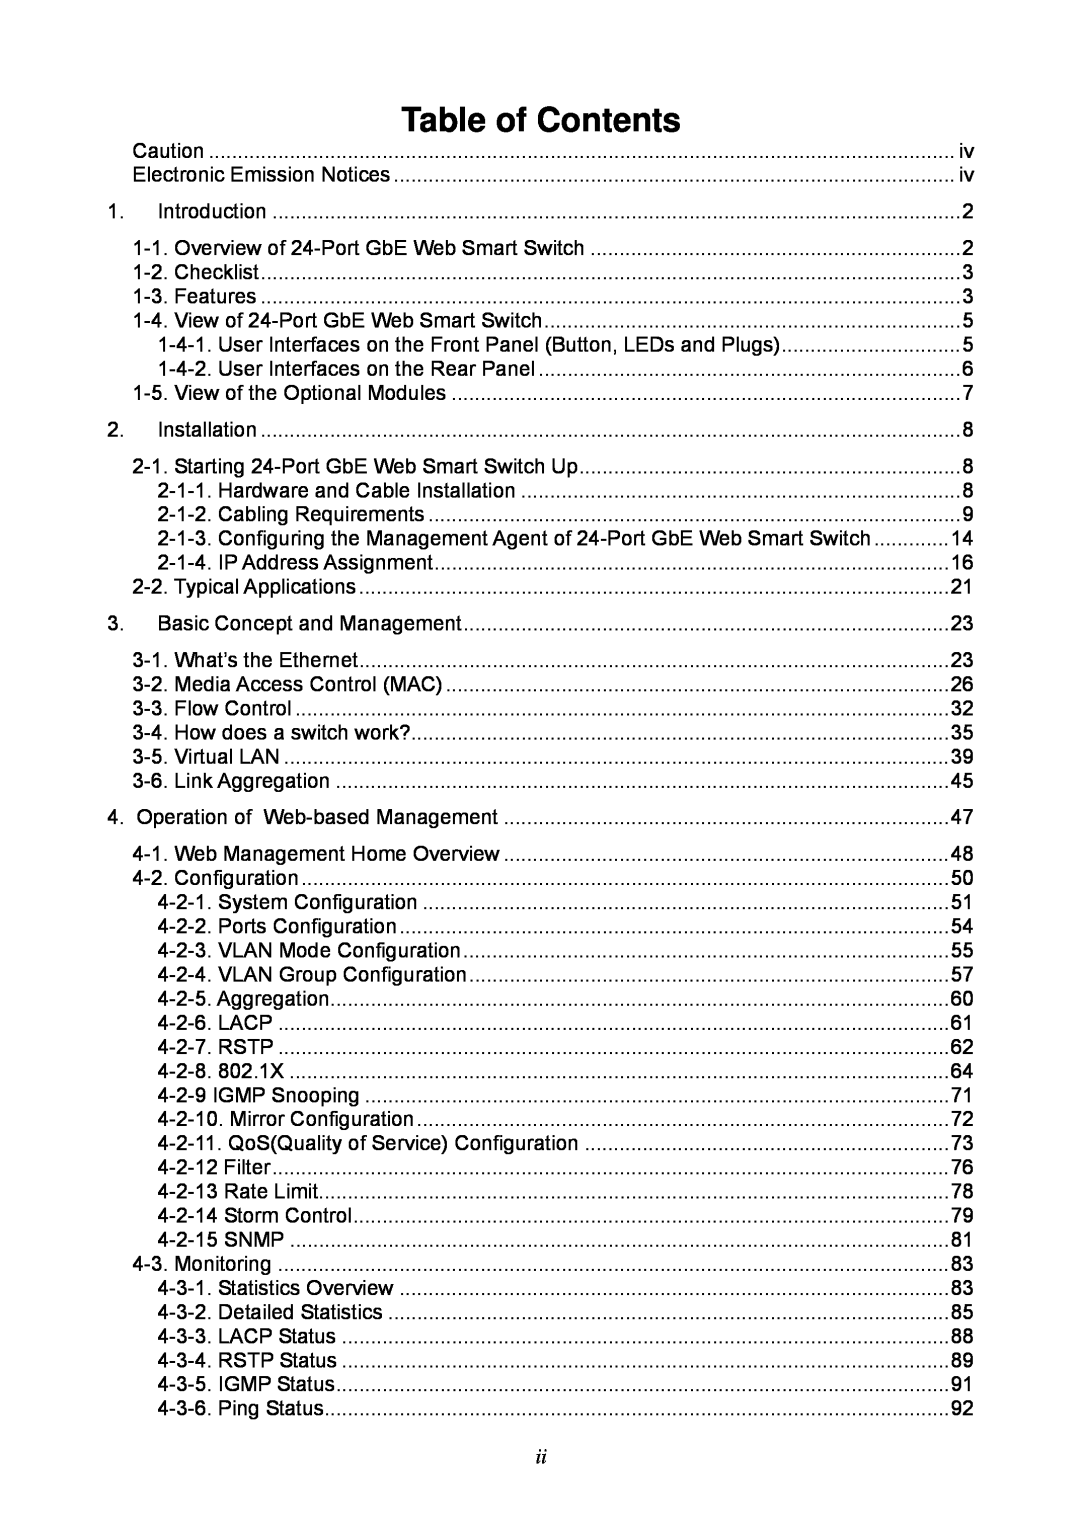 KTI Networks KGS-2404 manual Table of Contents 